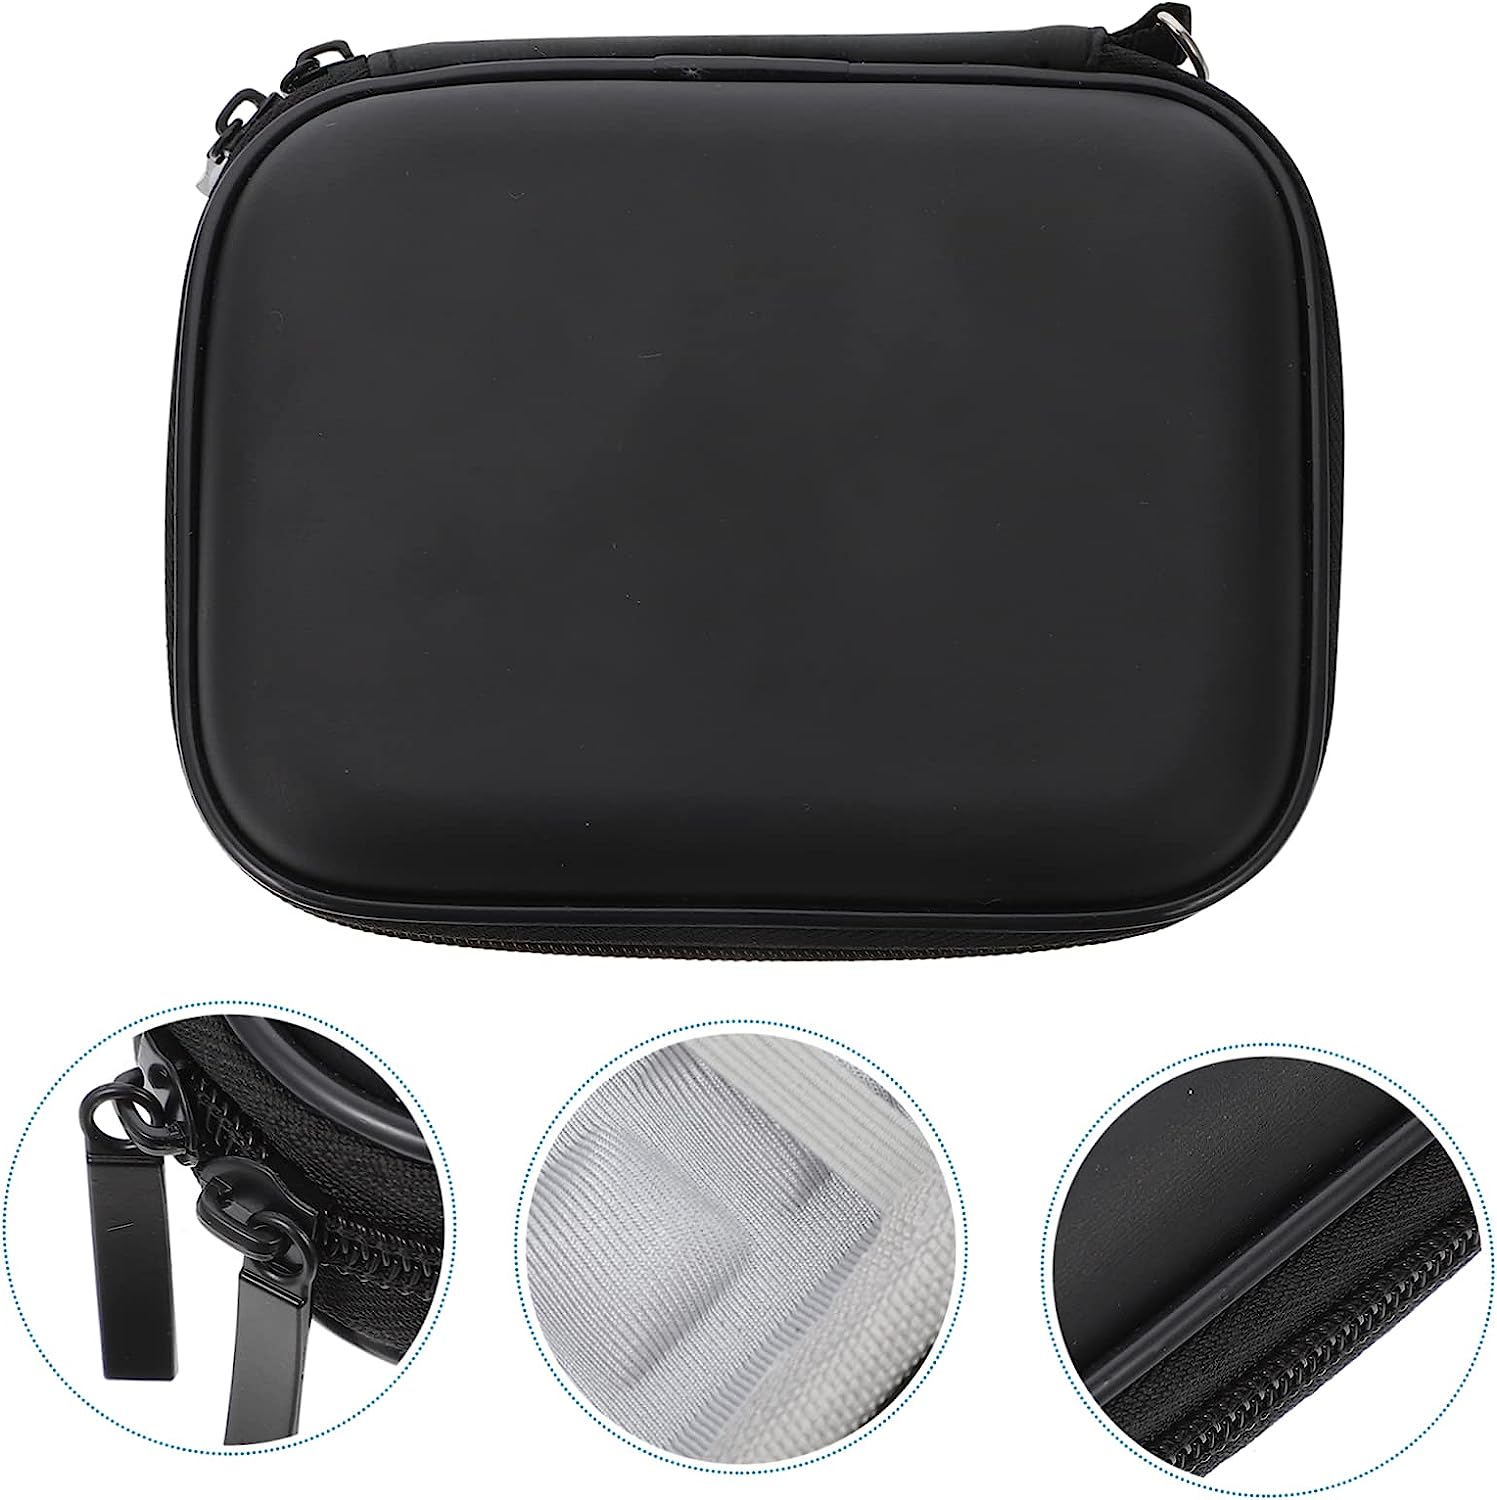 Storage Bag Charger Cable Bag Organizer for Traveling Organizer Bags for Travel Storage Pouch for Travel Storage Case Travel Bag High End Eva Hot Pressing Black Earphone